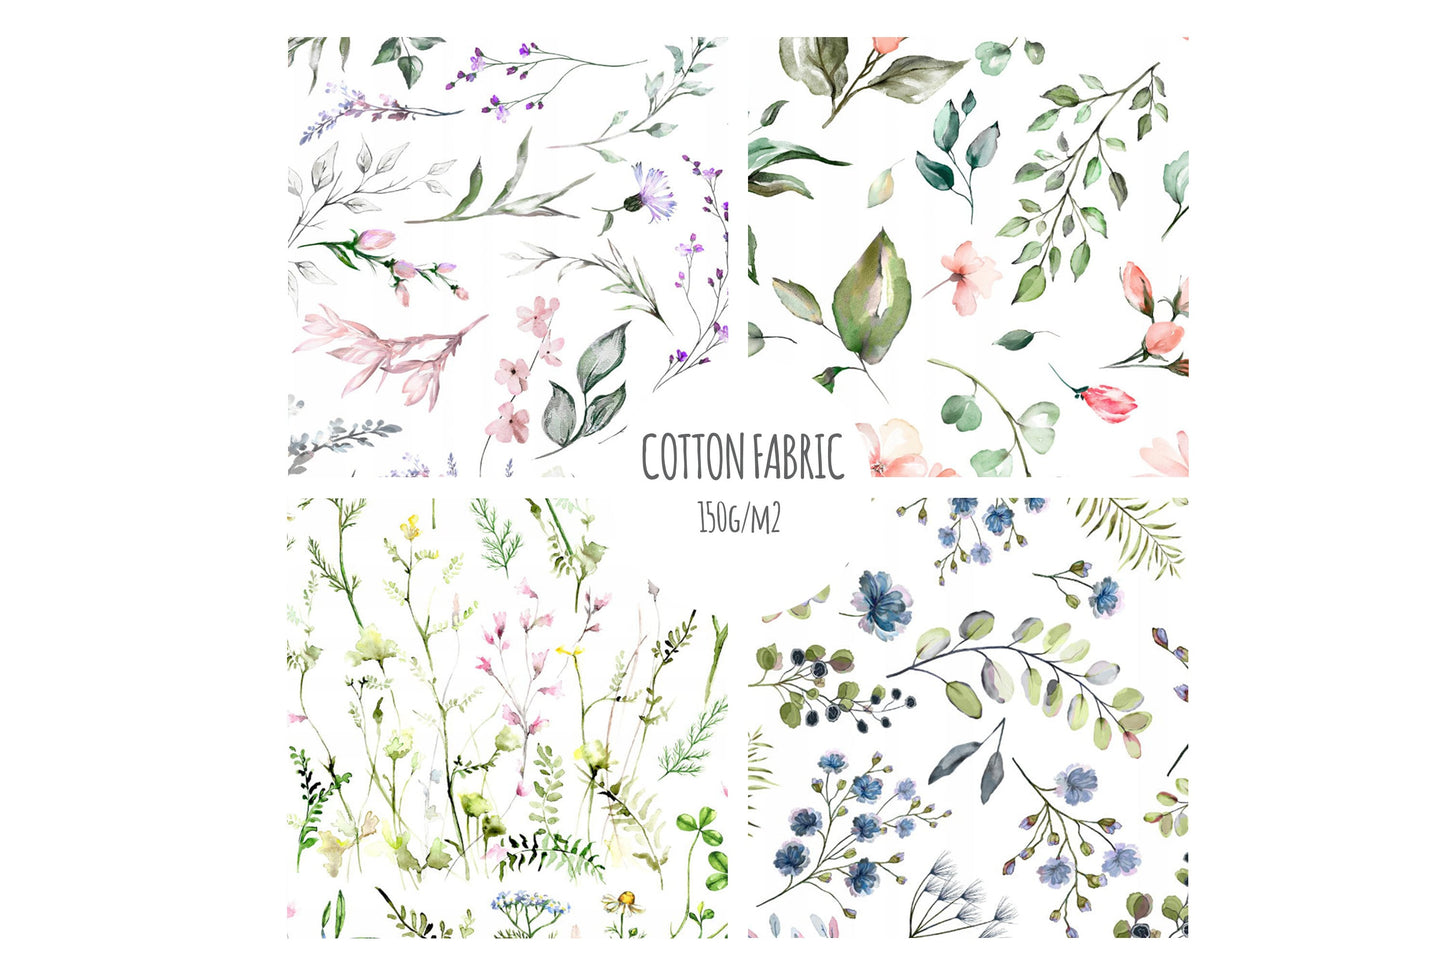 COTTON FABRIC | premium digital NATURE print fabric | meadow fabric| soft cotton | diffrent patterns |150g/m2|  fabric by the meter / yard